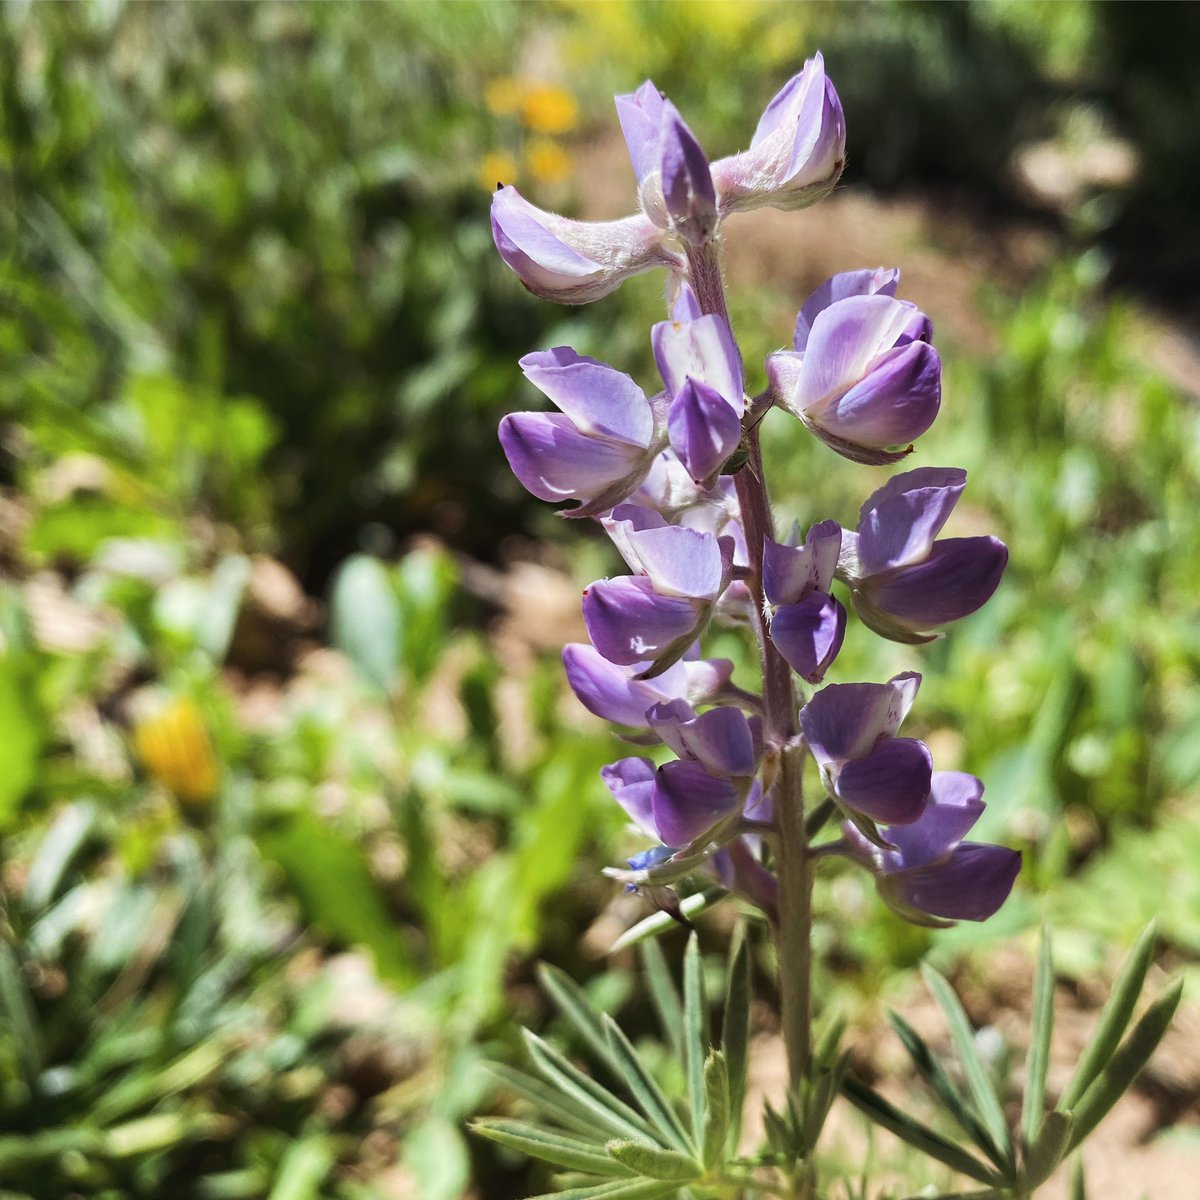 Lupines are blooming!